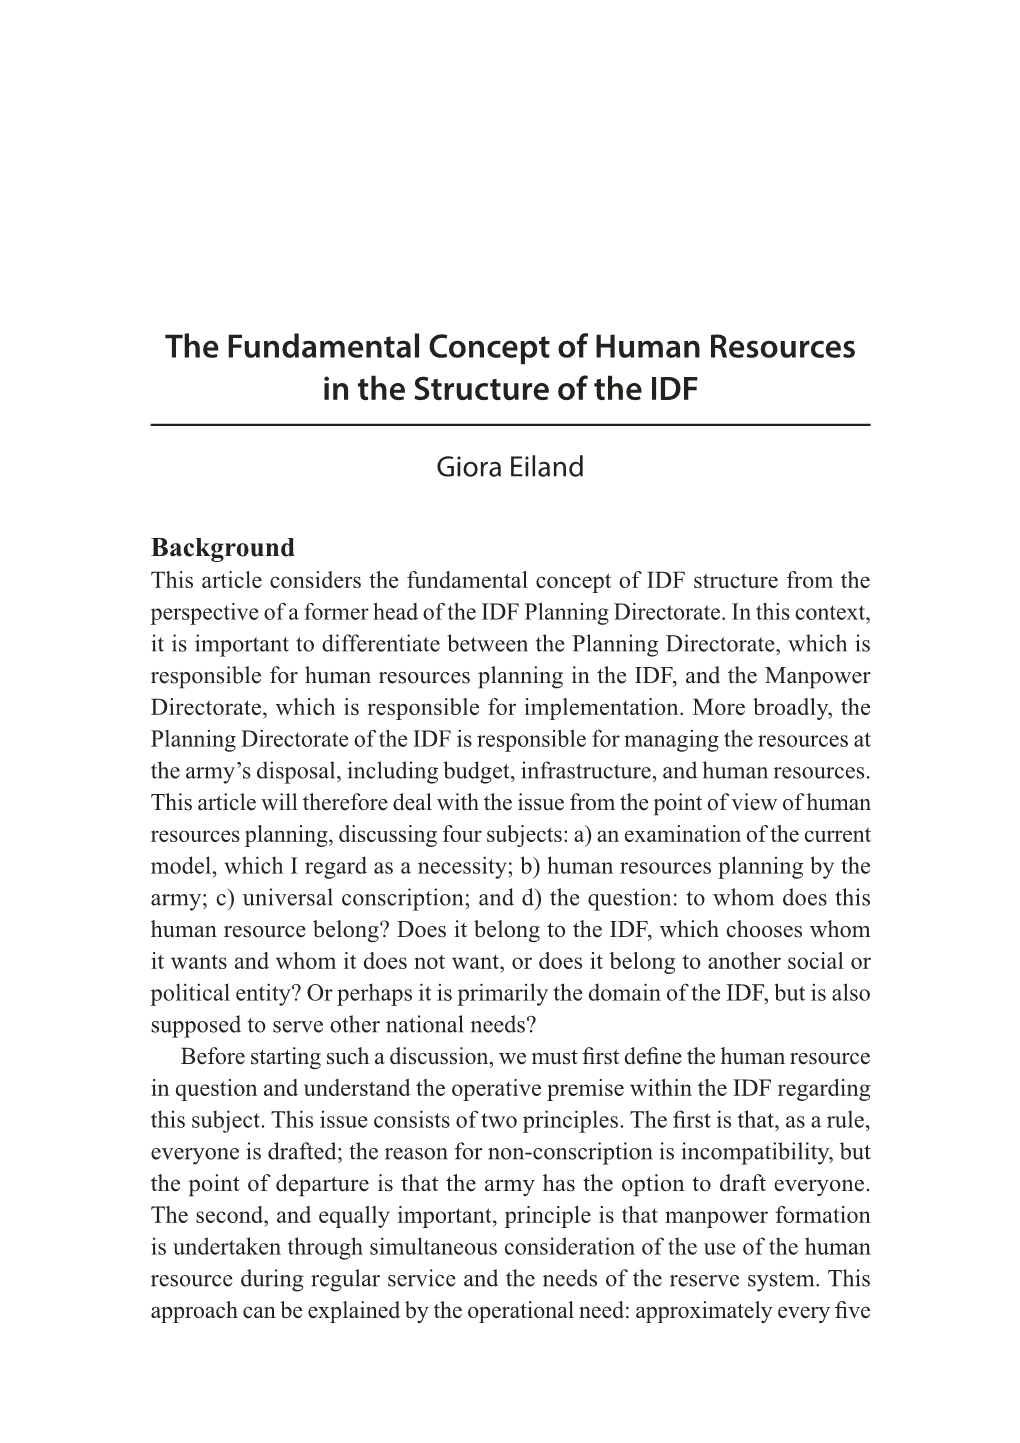 The Fundamental Concept of Human Resources in the Structure of the IDF